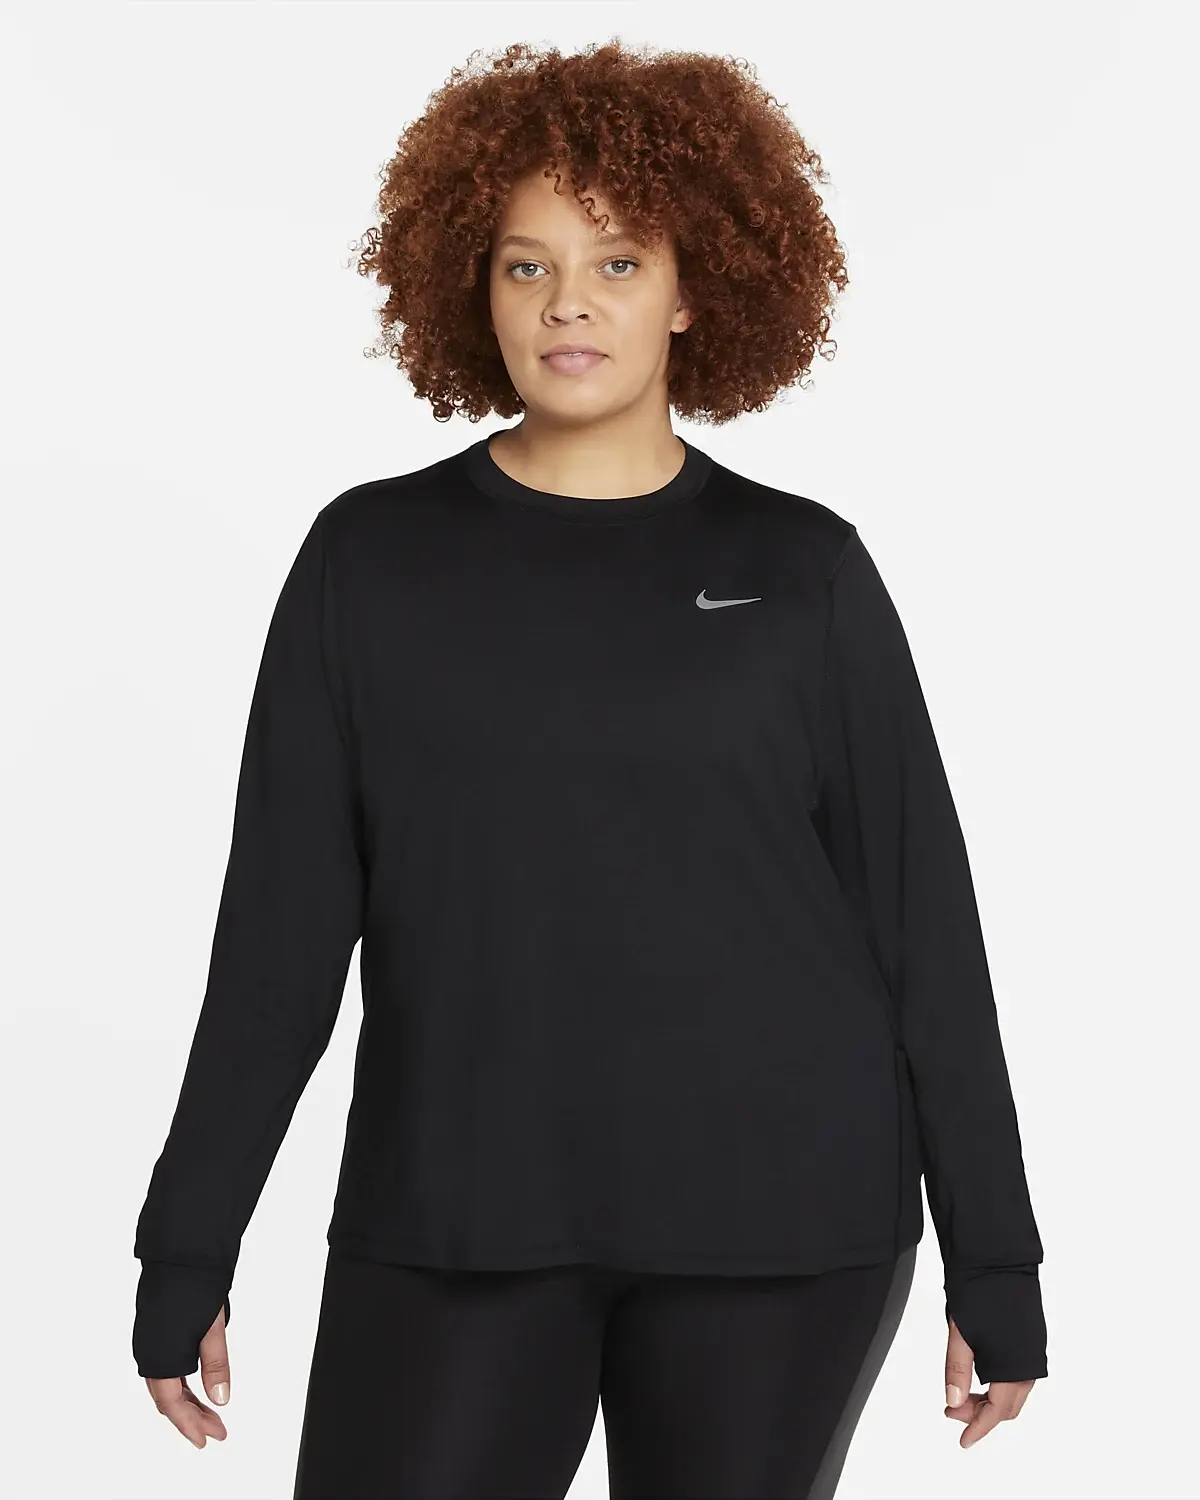 Nike Other. 1